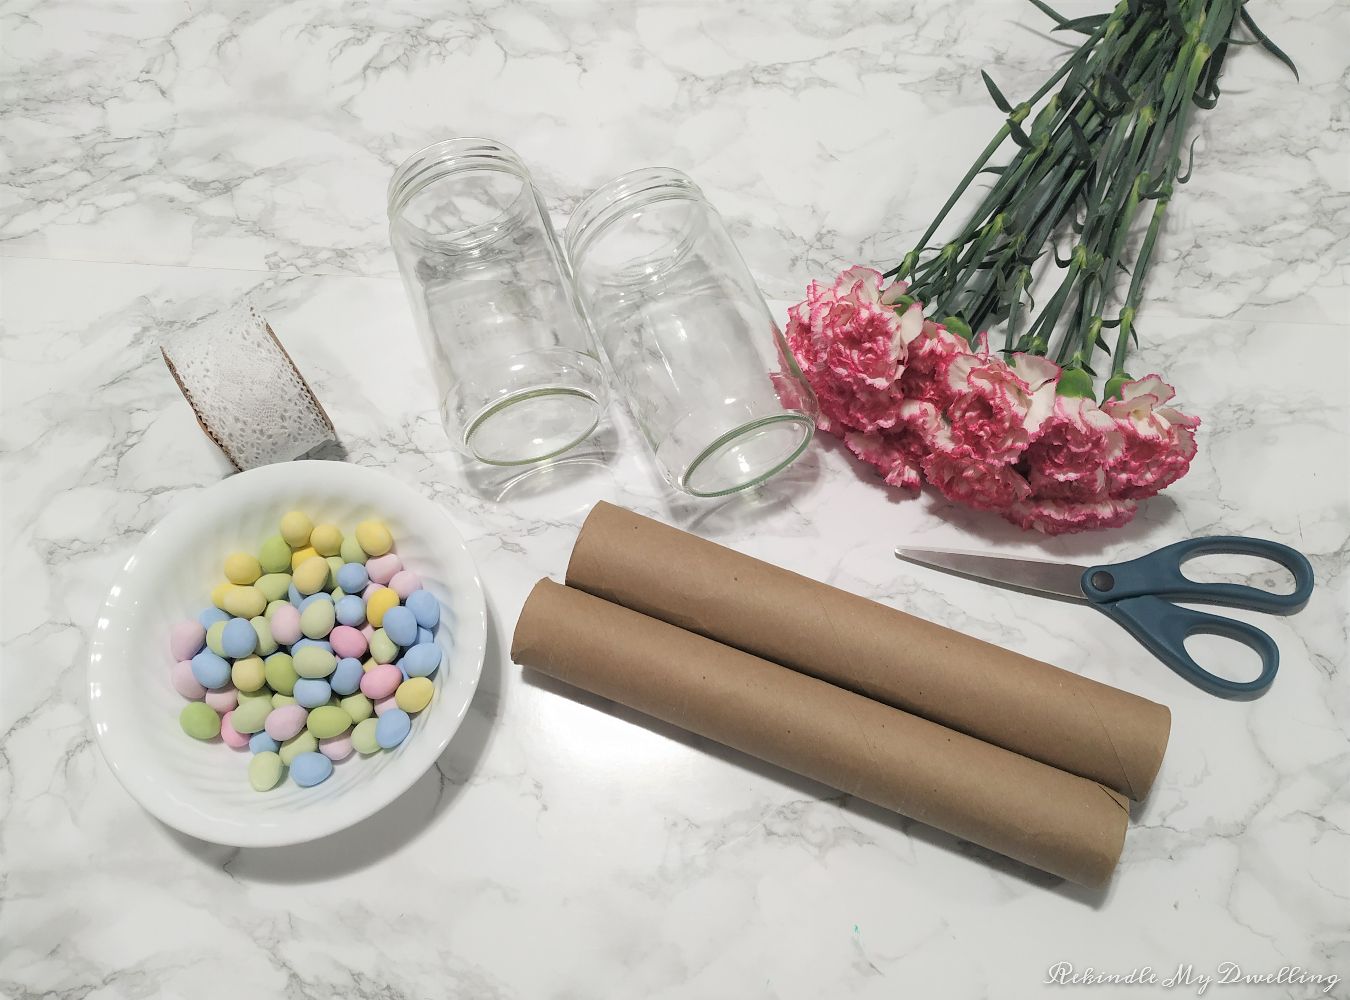 Materials to make Easter candy jars including candy, mason jars, ribbon, scissors, flowers and cardboard tubes.